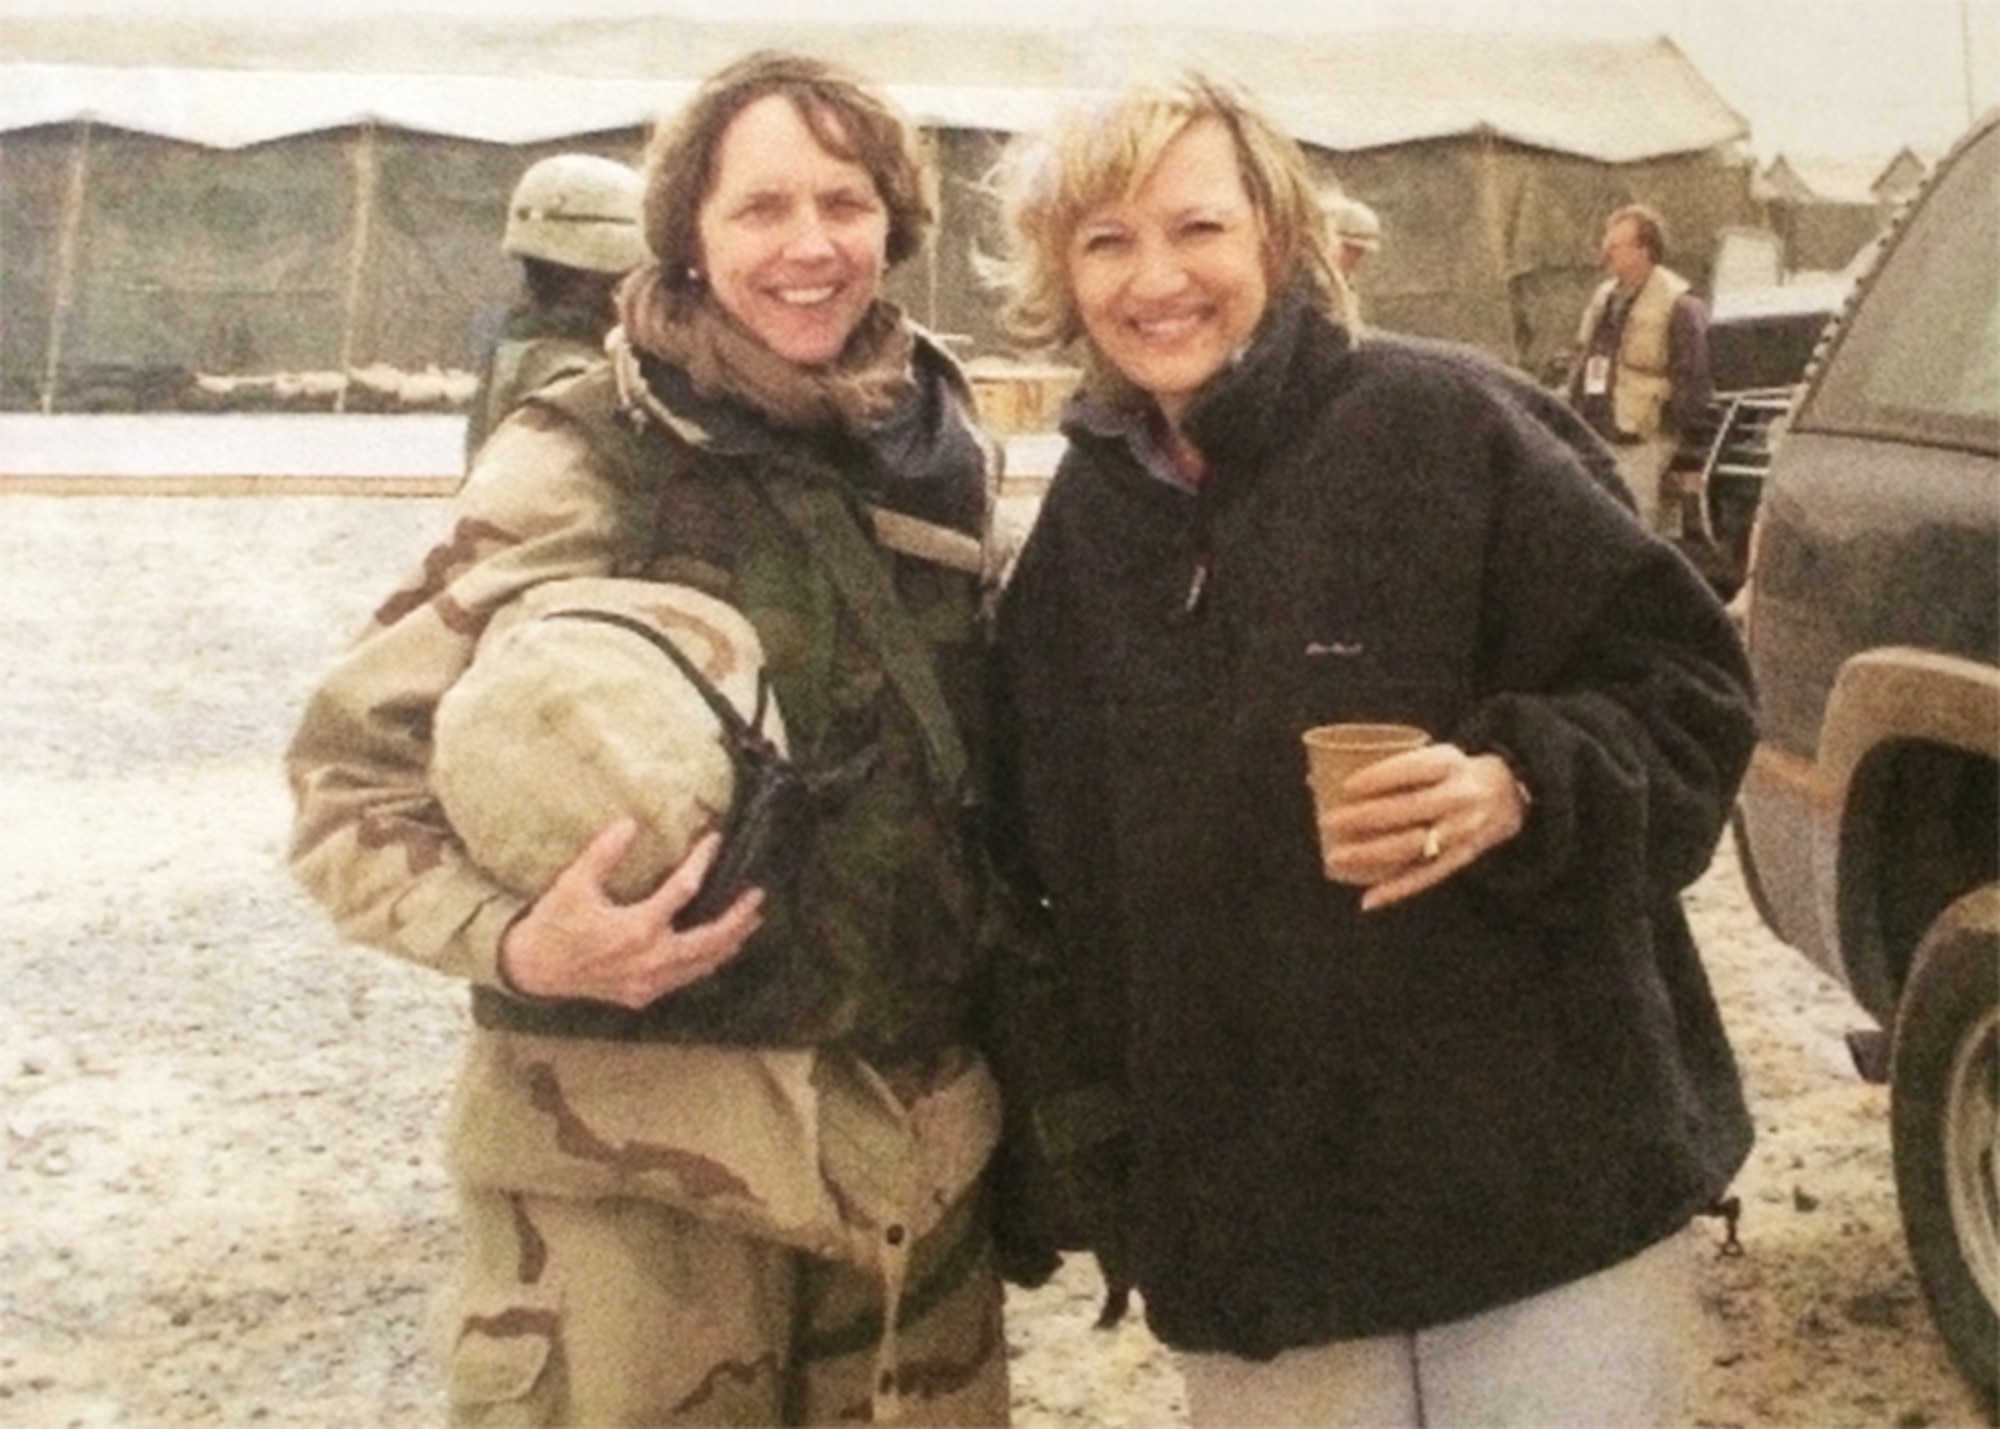 In 2003, Col. Carol Vermillion (left) with reporter Diane Sawyer of ABC News, in front of an Army Combat Support Hospital in Kuwait. (Courtesy photo)